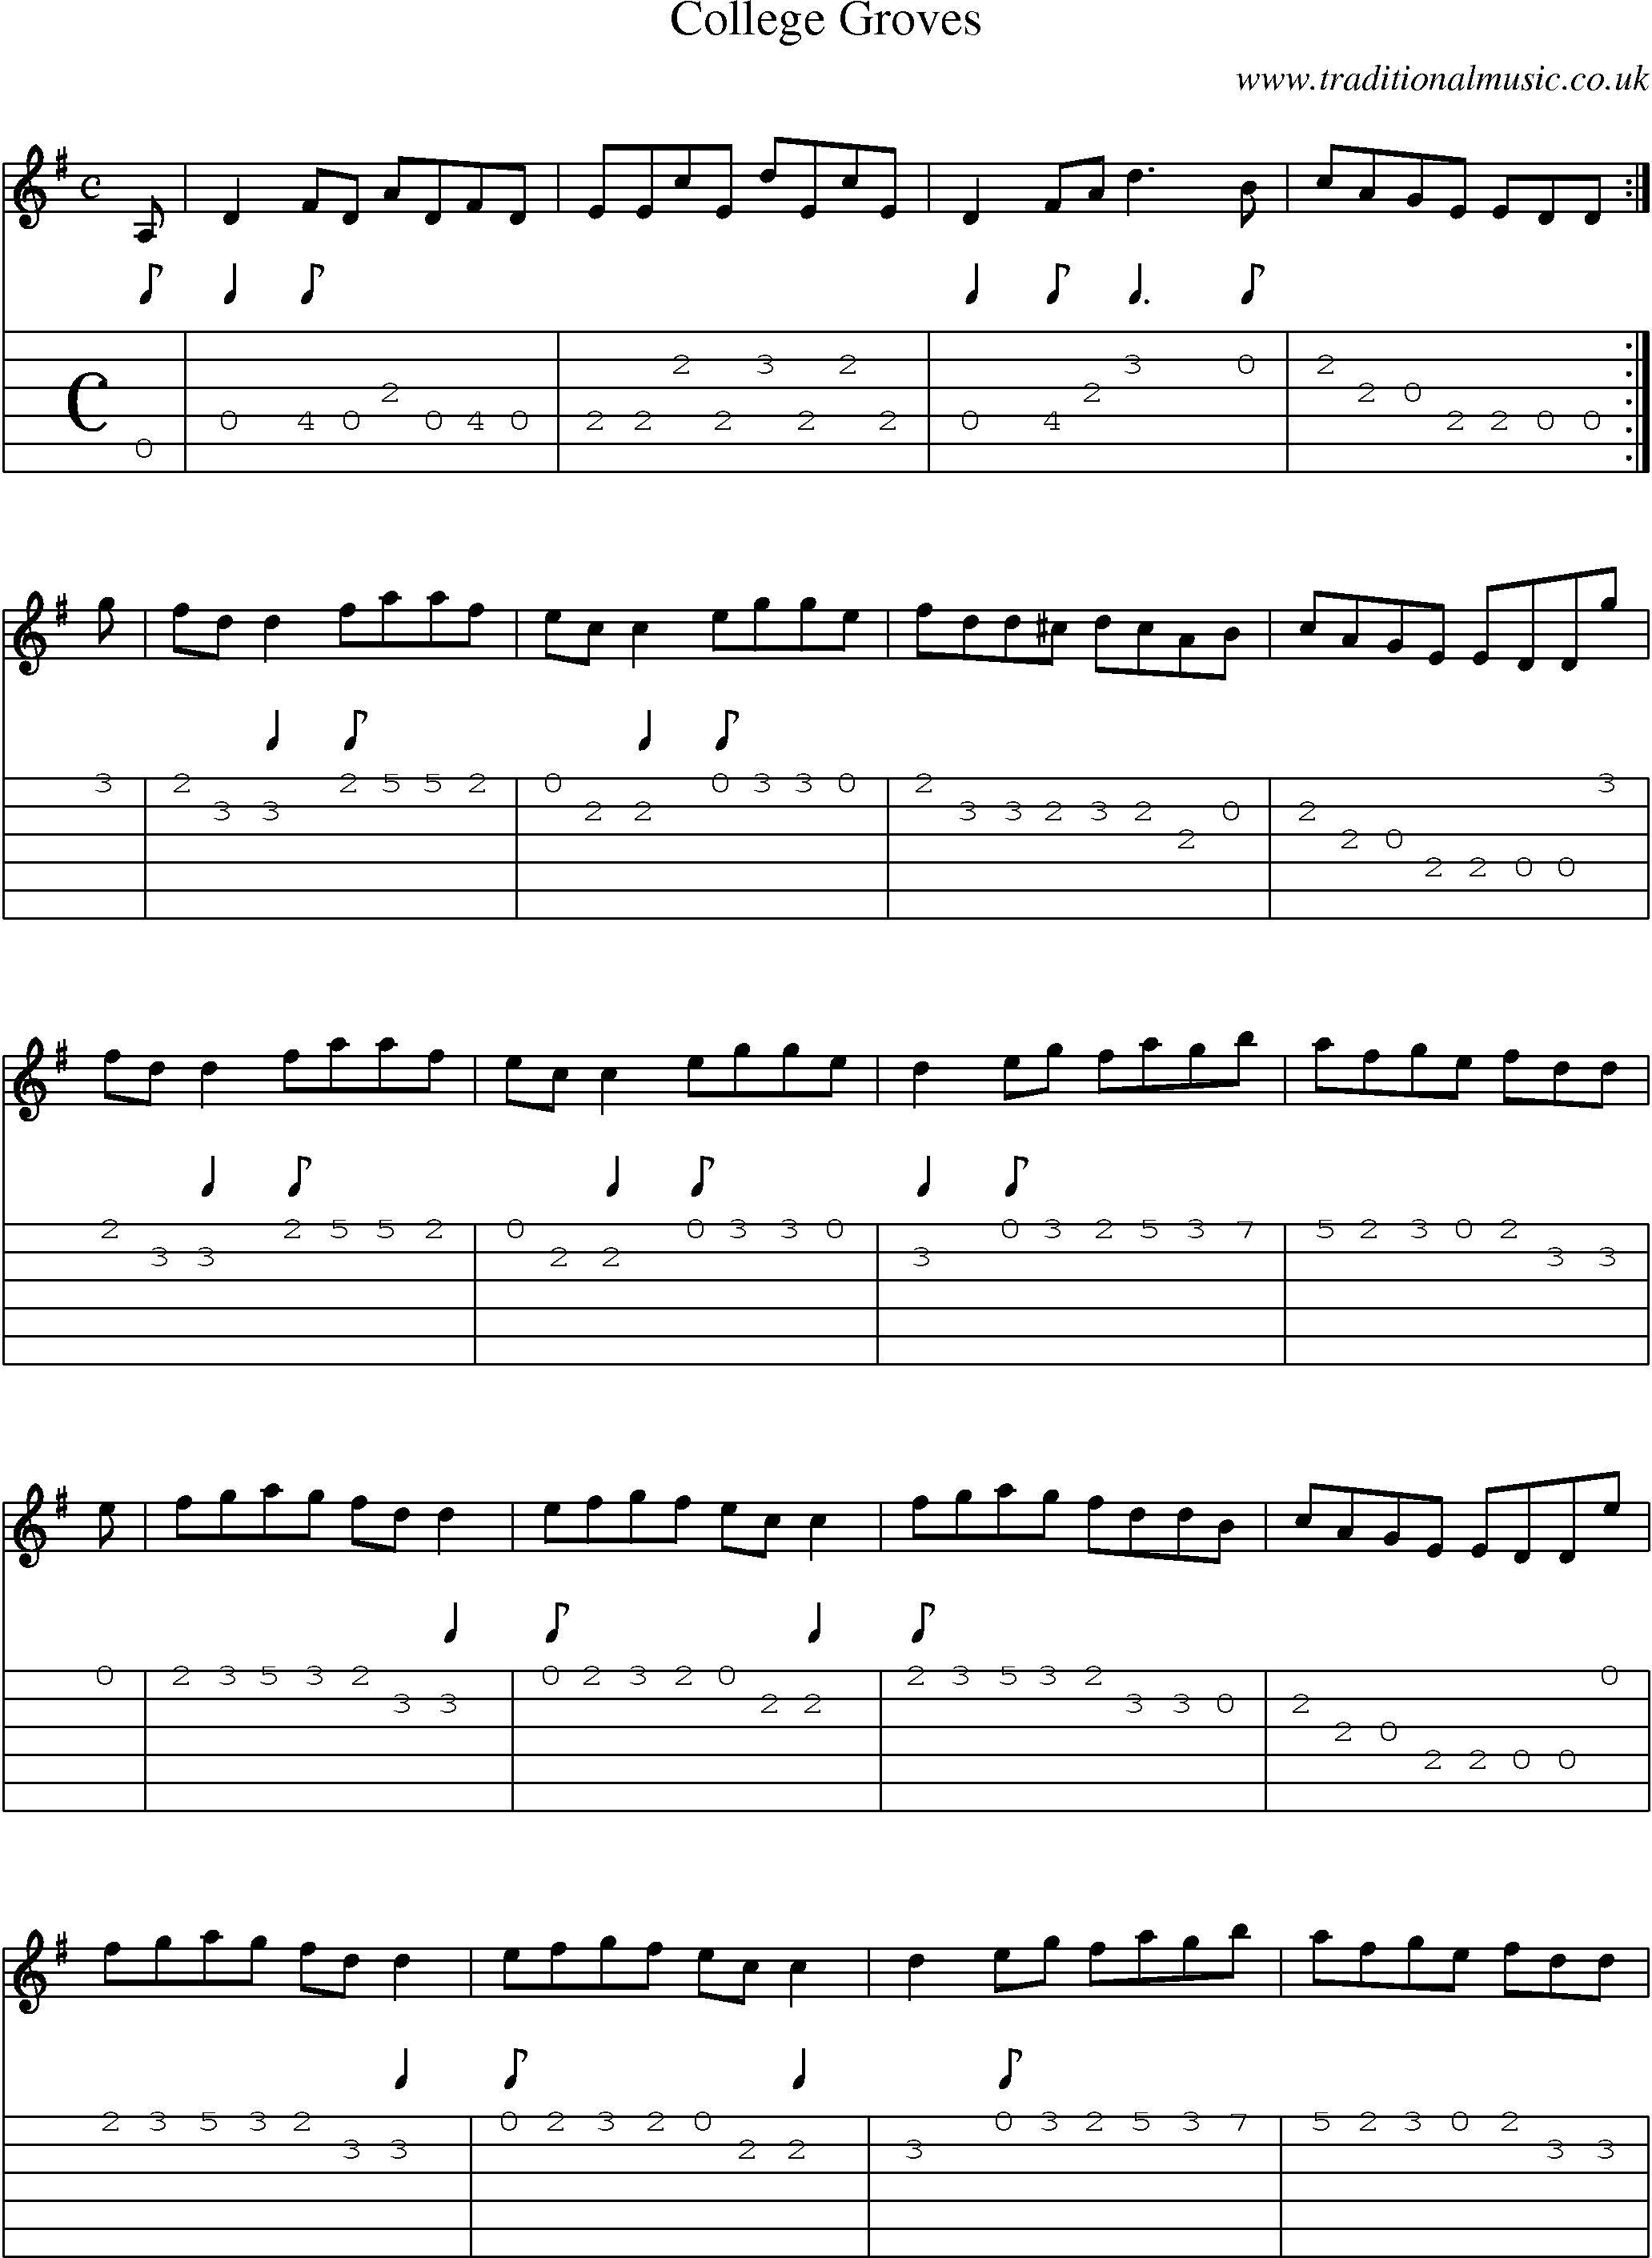 Music Score and Guitar Tabs for College Groves